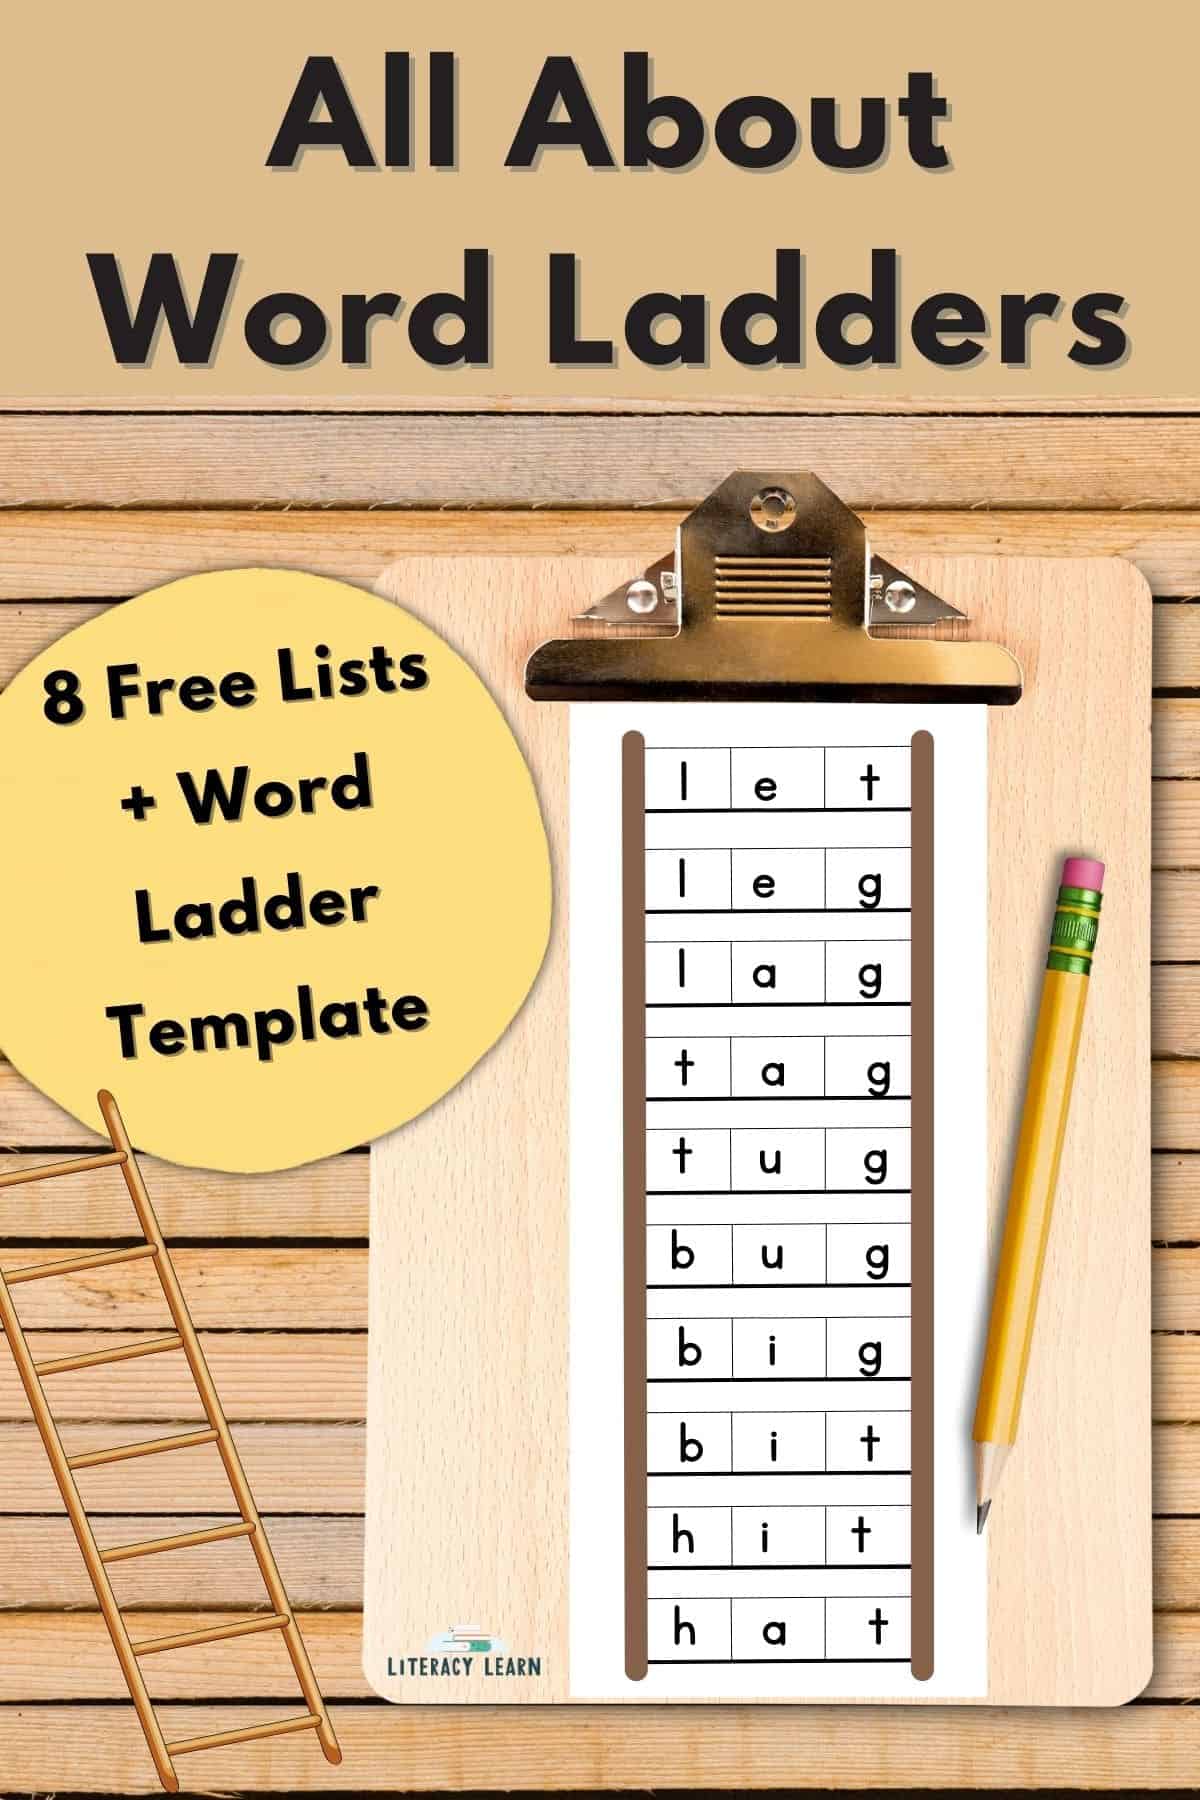 Graphic showing a word ladder or word chain on a clipboard with title "All About Word Ladders."